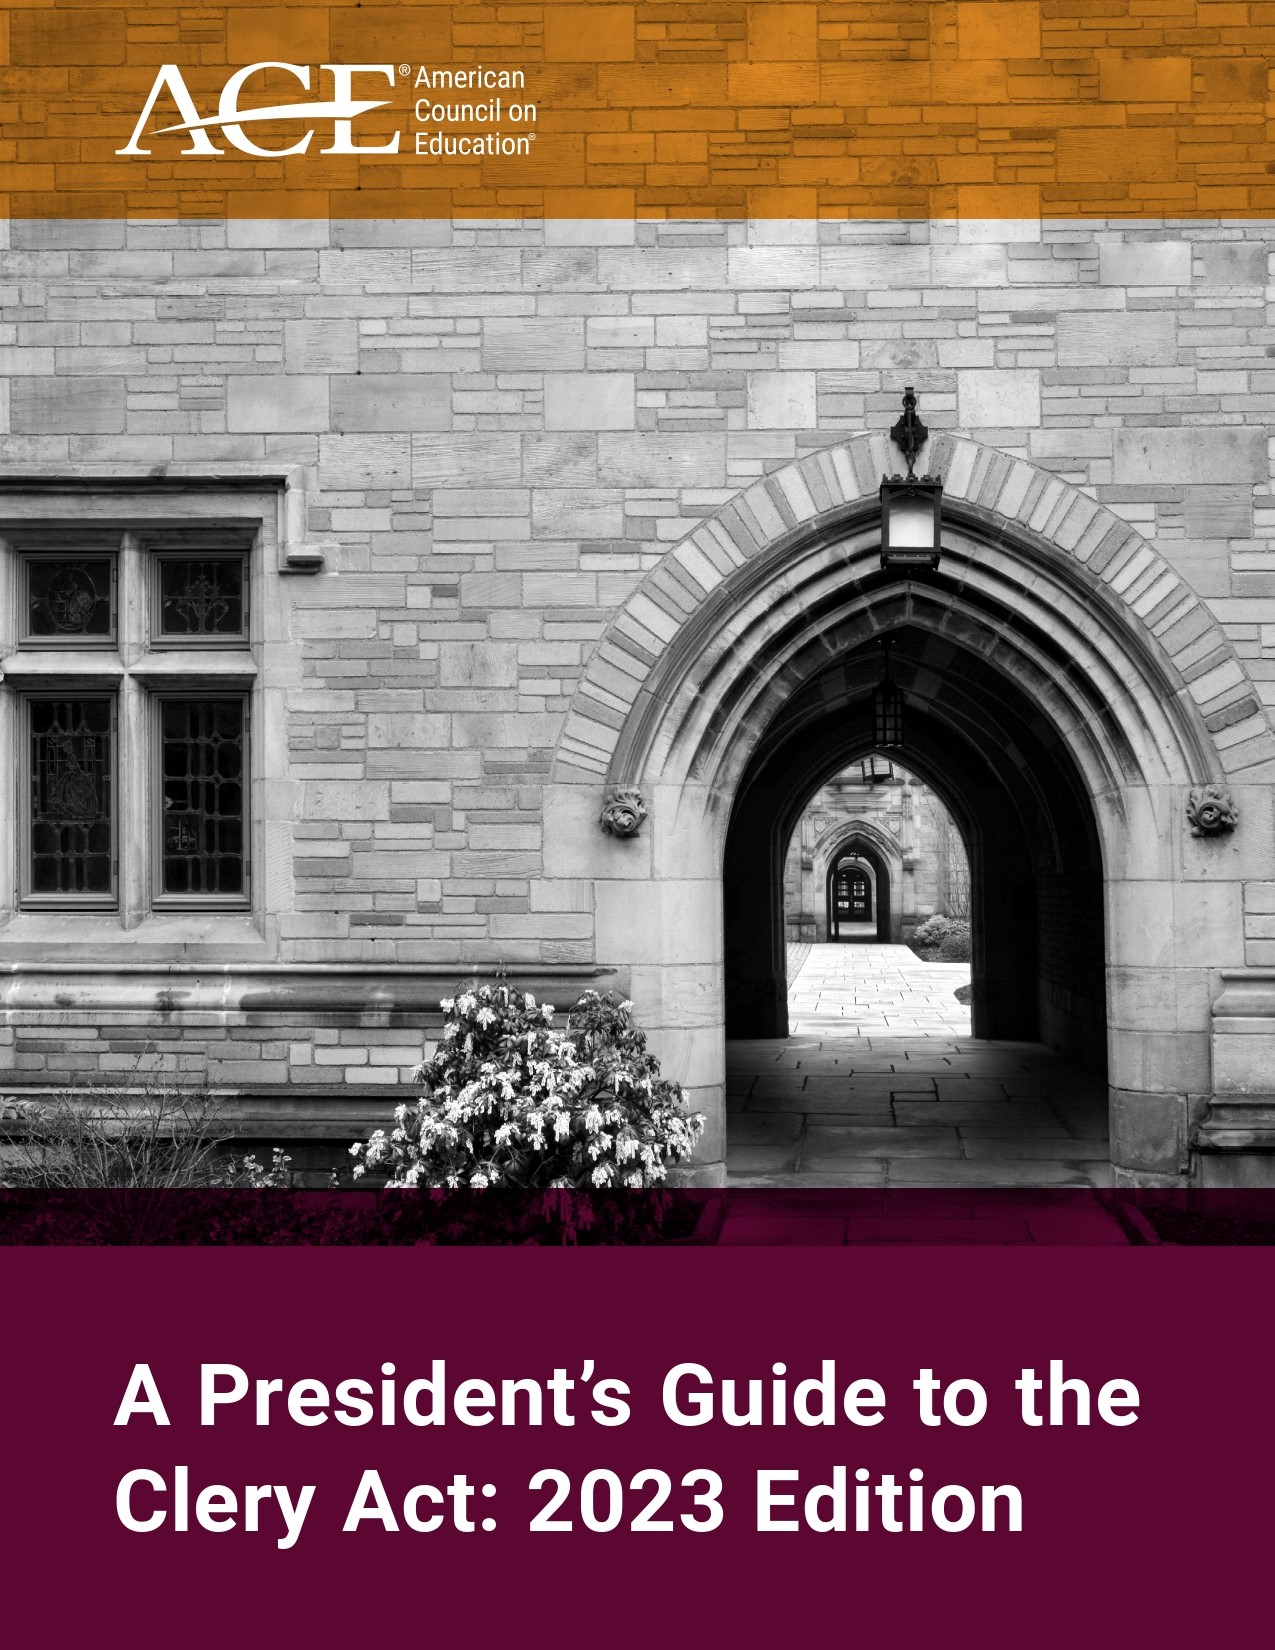 A President’s Guide to the Clery Act: 2023 Edition